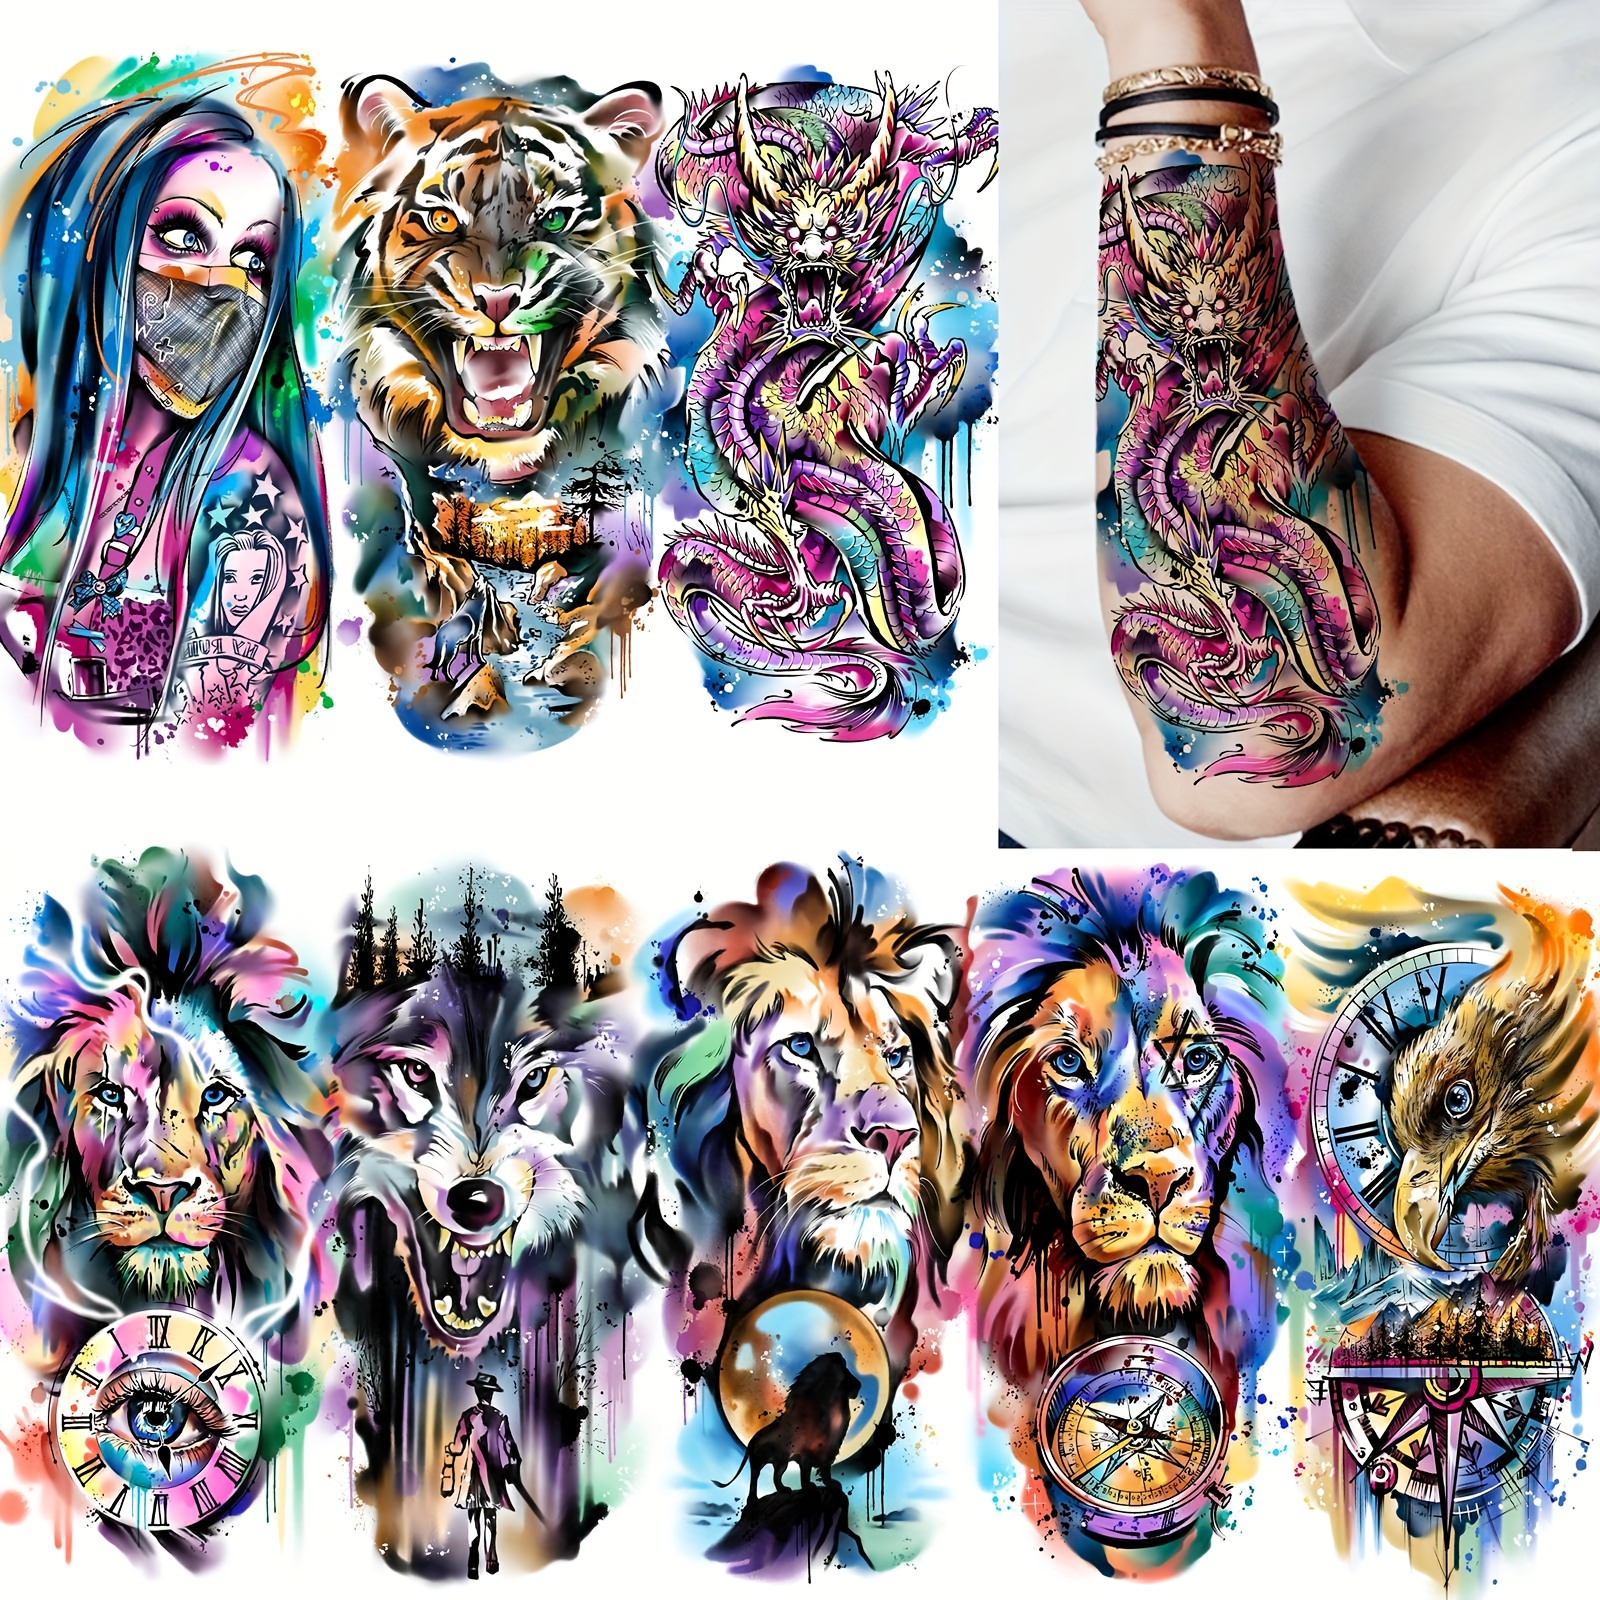 

8-piece Vibrant Temporary Tattoos For Men & Women - Realistic Wolf, Lion, Dragon & Eagle Designs | Waterproof Body Art Stickers For Arms, Legs & More Tattoo Accessories Accessories Tattoos